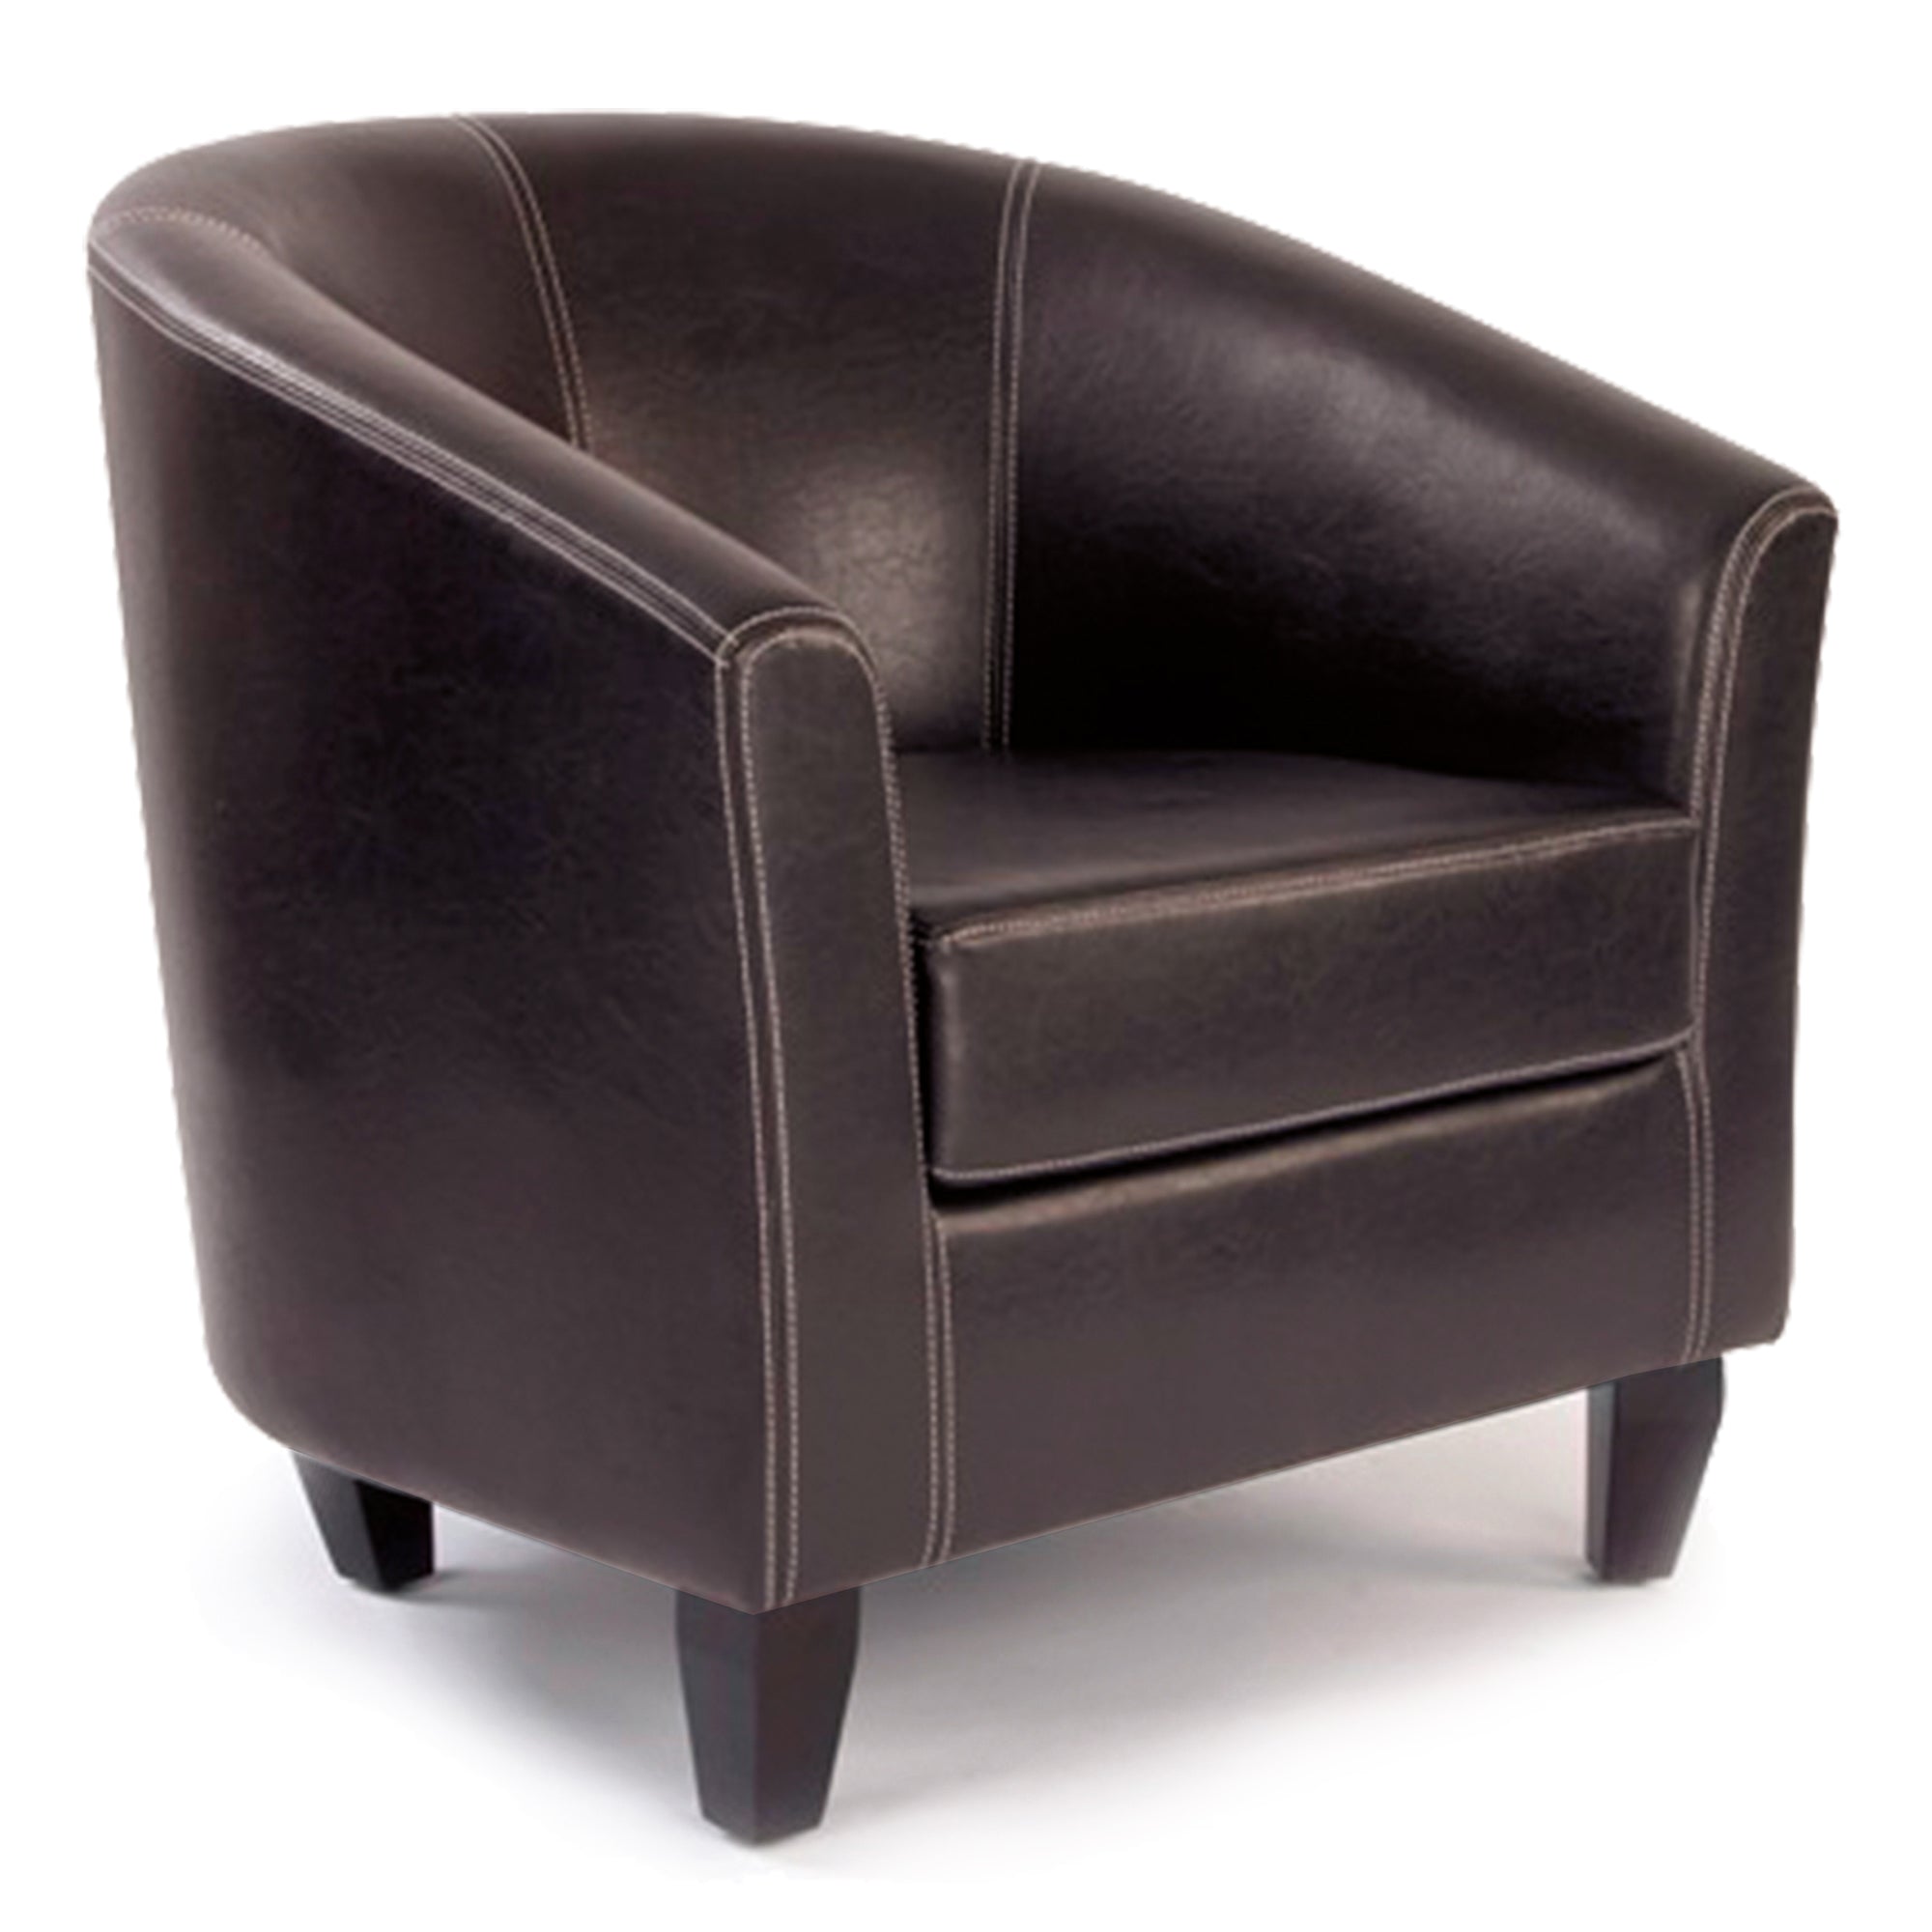 Metro – High Back Lounge Armchair Upholstered in a Durable Leather Effect Finish